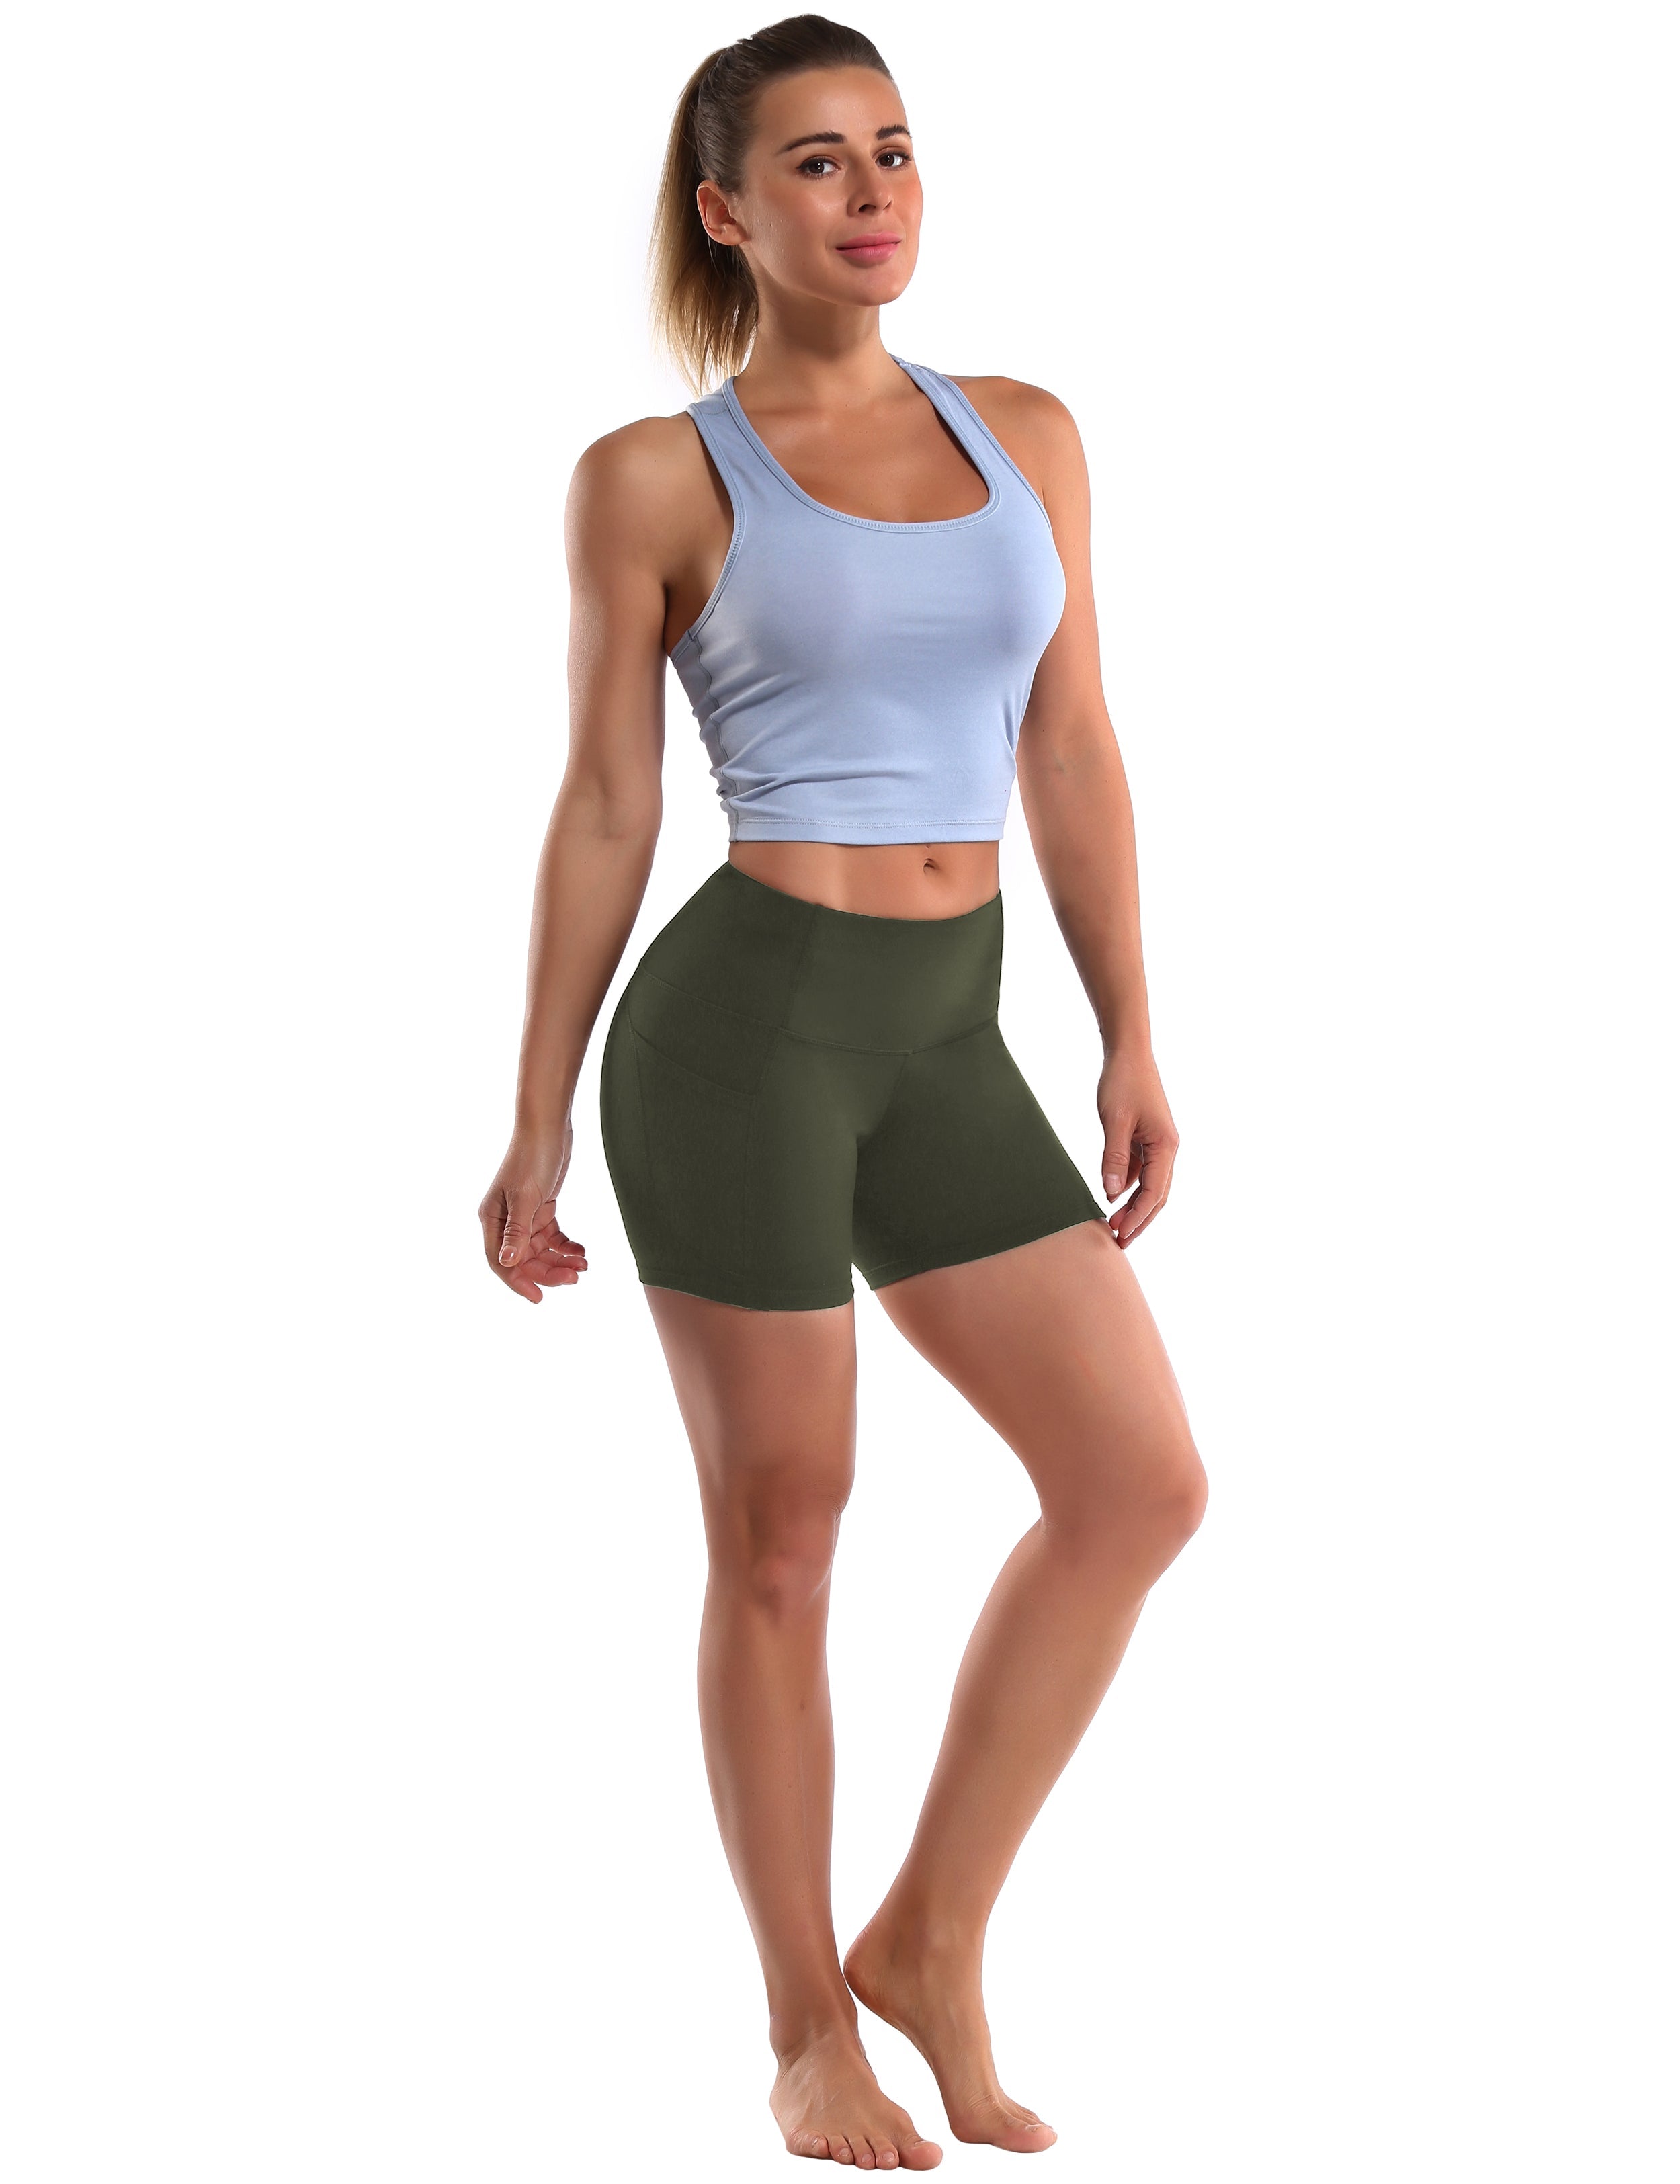 High Waist Side Pockets Running Shorts green Softest-ever fabric High elasticity 4-way stretch Fabric doesn't attract lint easily No see-through Moisture-wicking Machine wash 88% Nylon, 12% Spandex